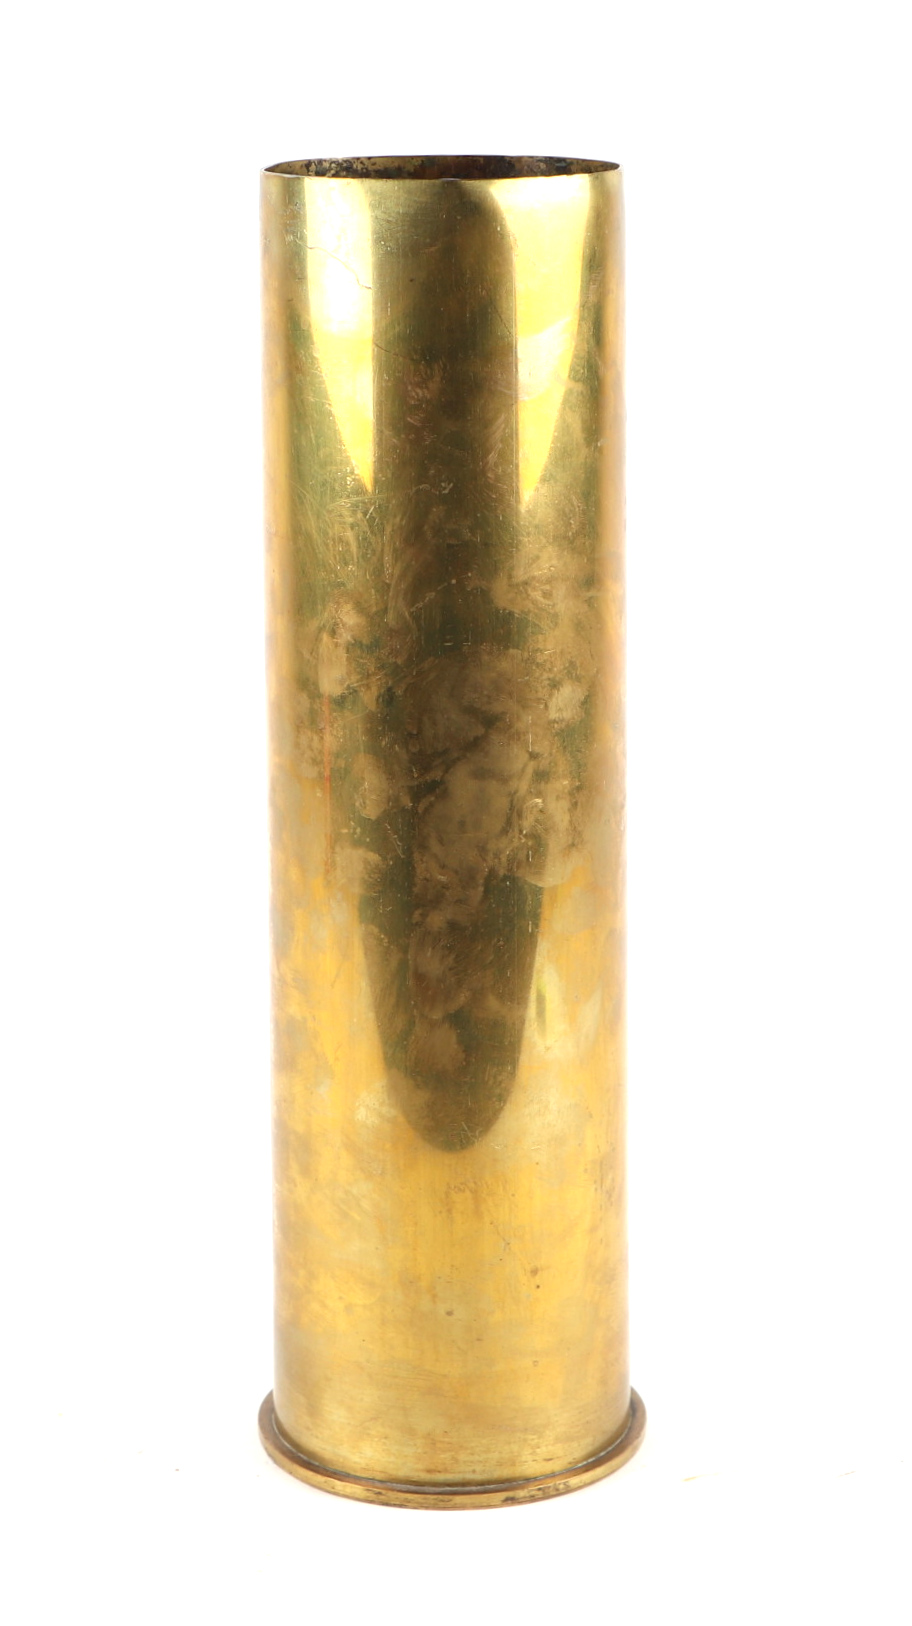 A 1913 dated WWI French brass shell case stick stand. 39cms (15.375ins) high by 12cms (4.75ins)